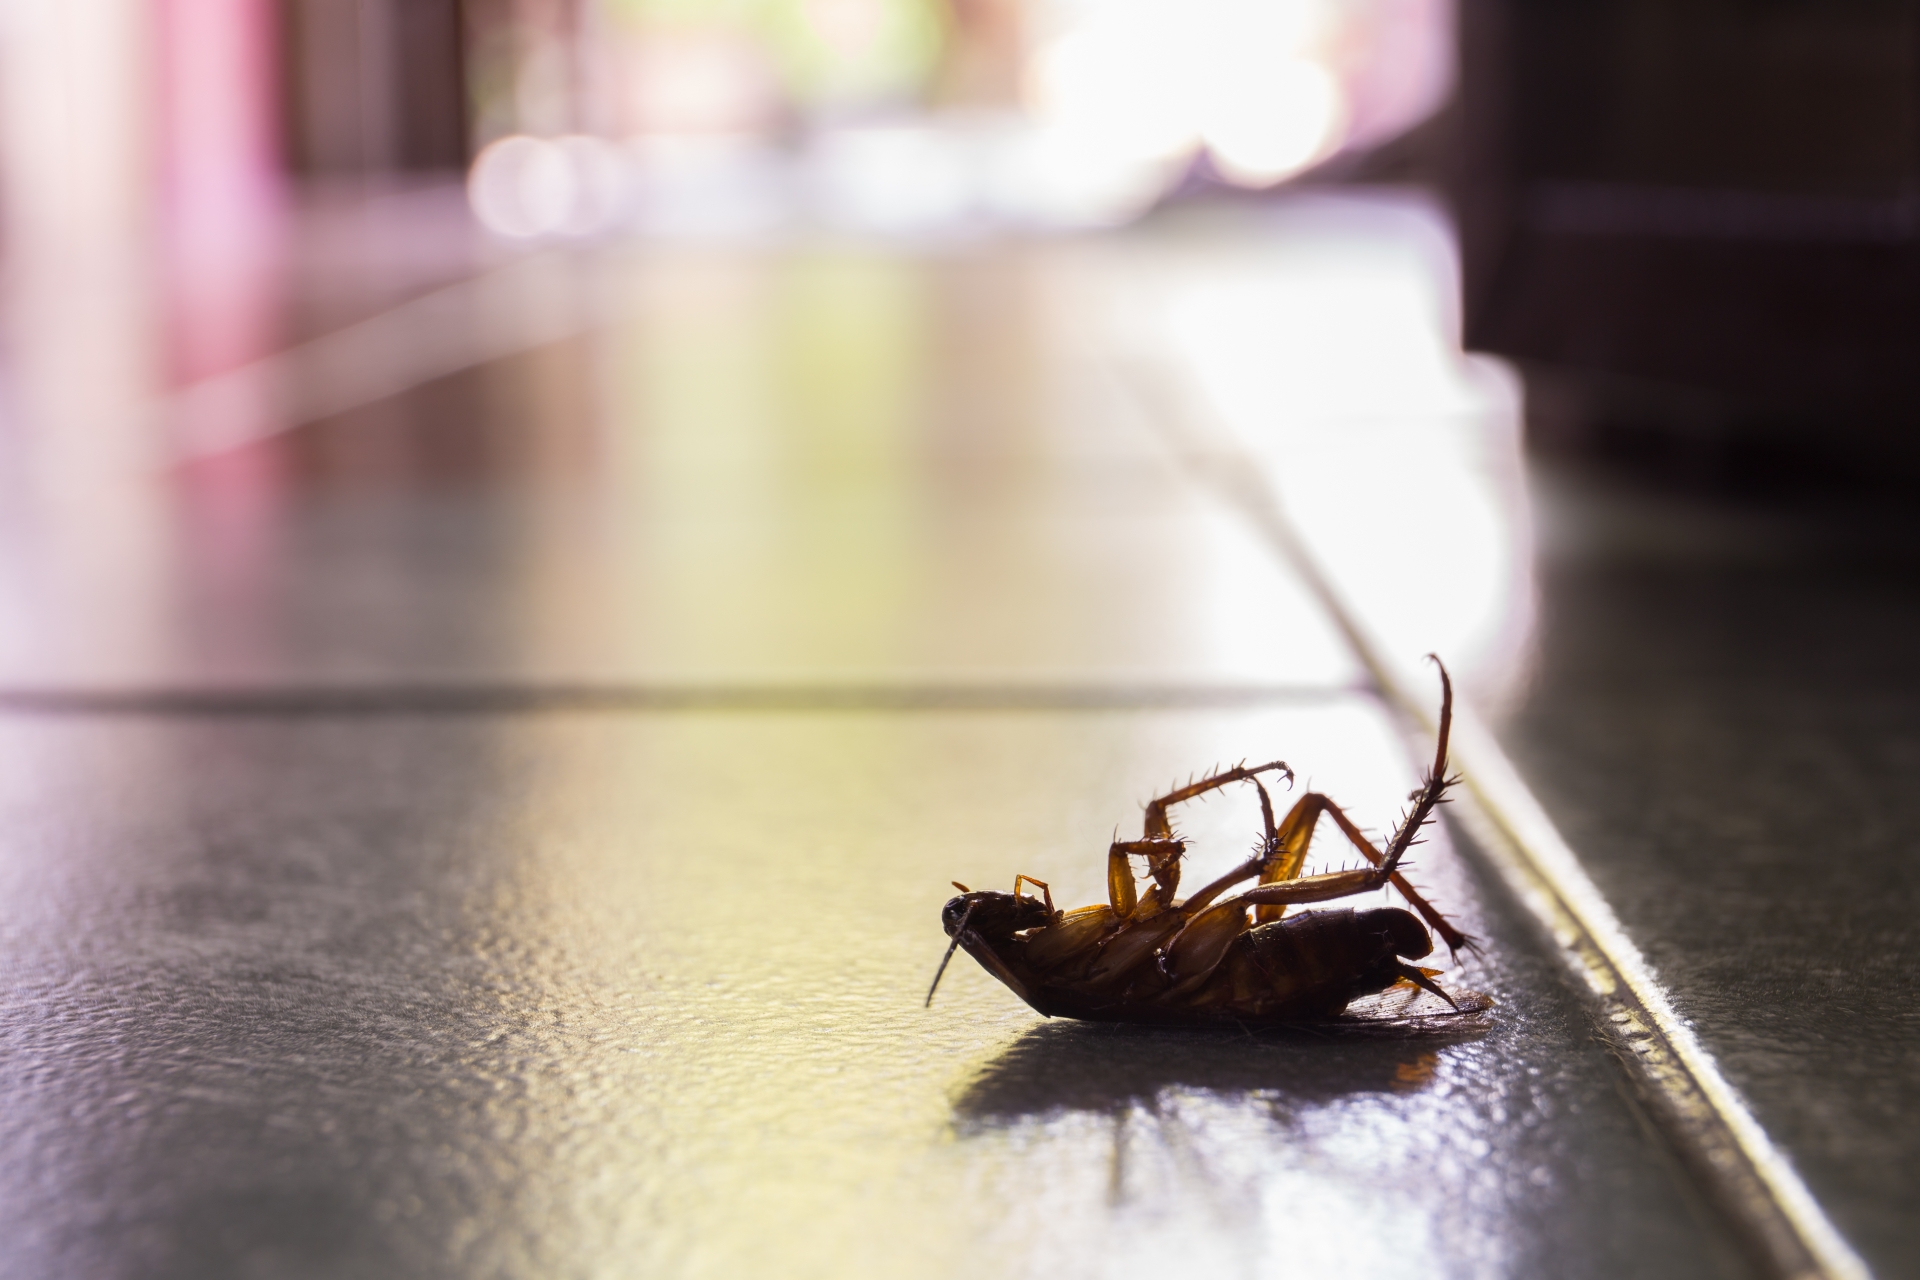 Cockroach Control, Pest Control in Acton, W3. Call Now 020 8166 9746